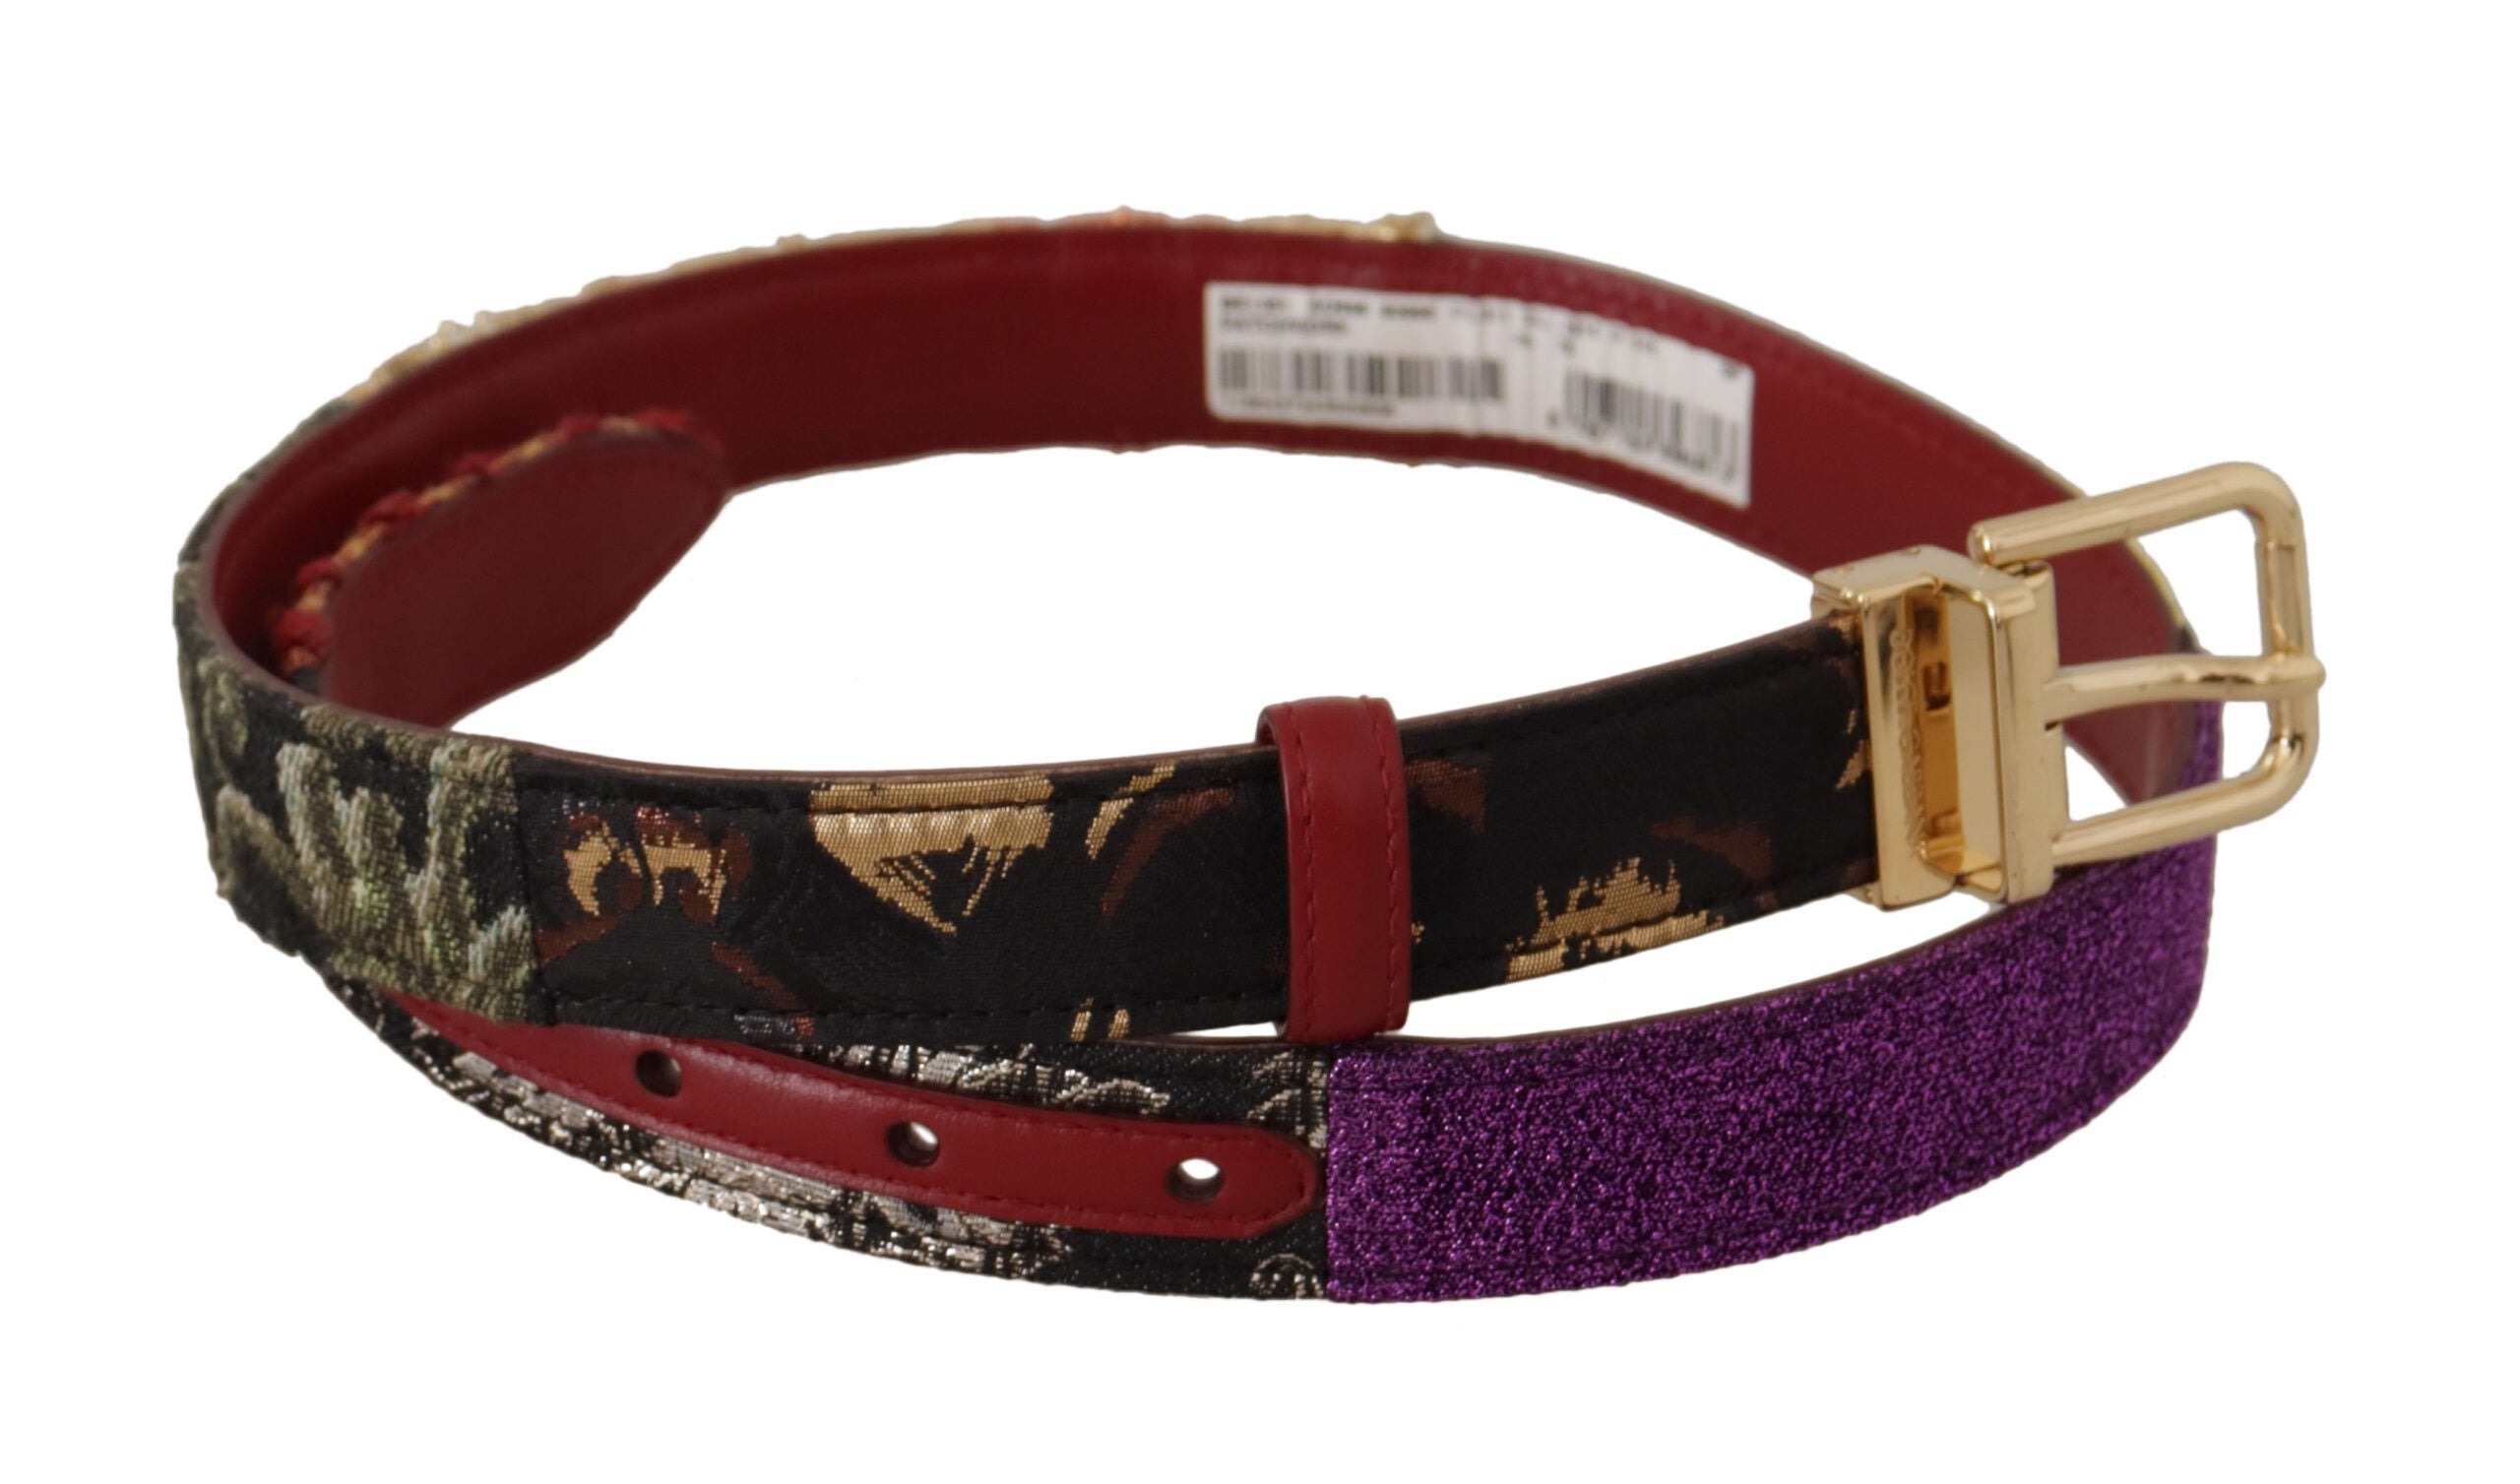 Dolce & Gabbana Multicolor Canvas Leather Belt with Engraved Buckle